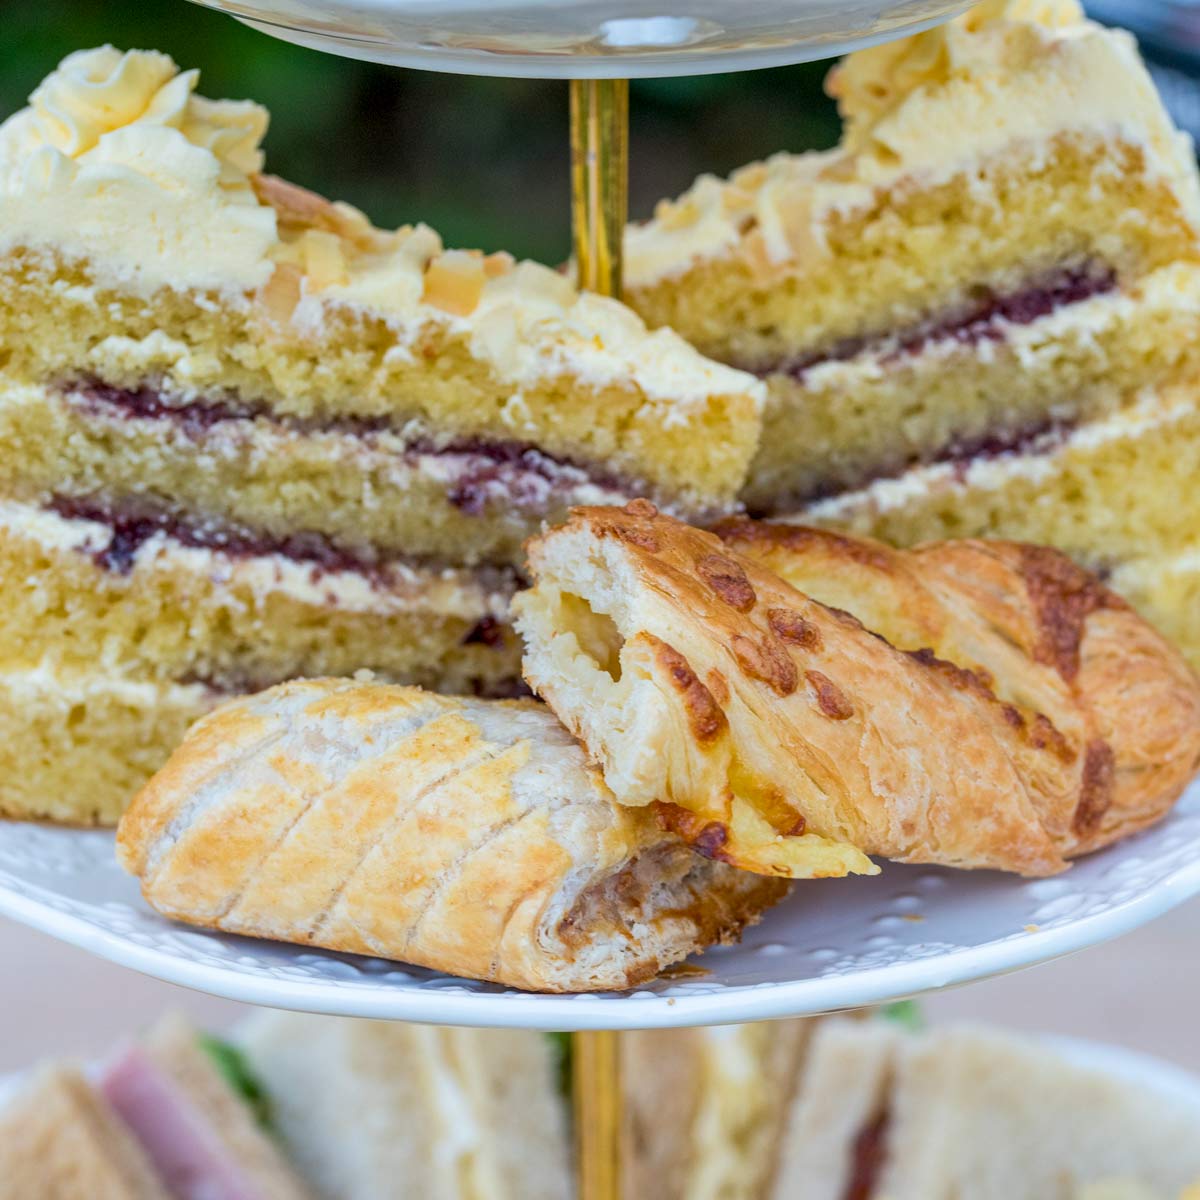 Child's Mother's Day Afternoon Tea from the Helenium Tea Room at Barnsdale Gardens